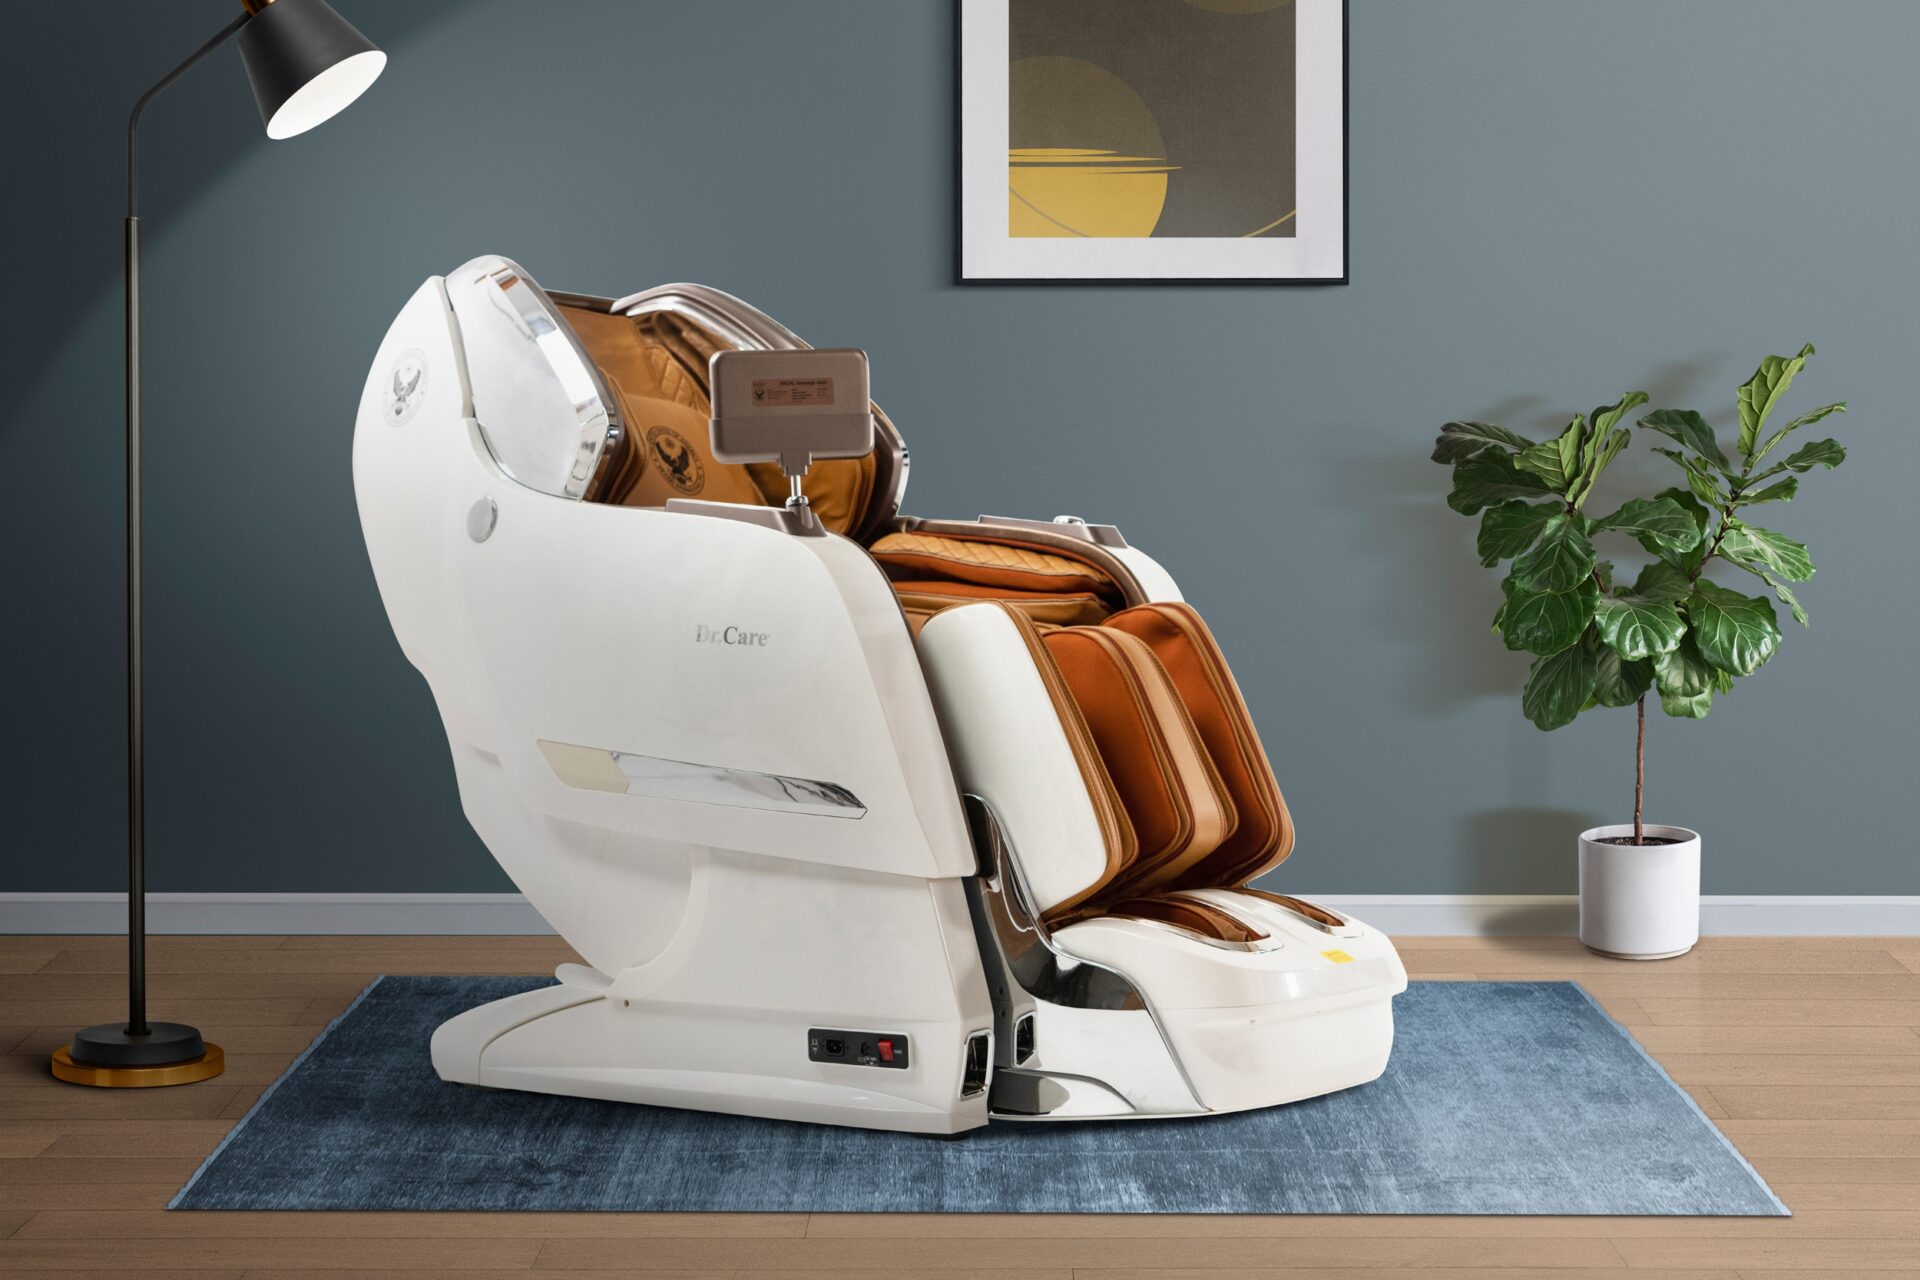 Dr.Care DR-XR 967 XREAL full-body Massage Chair